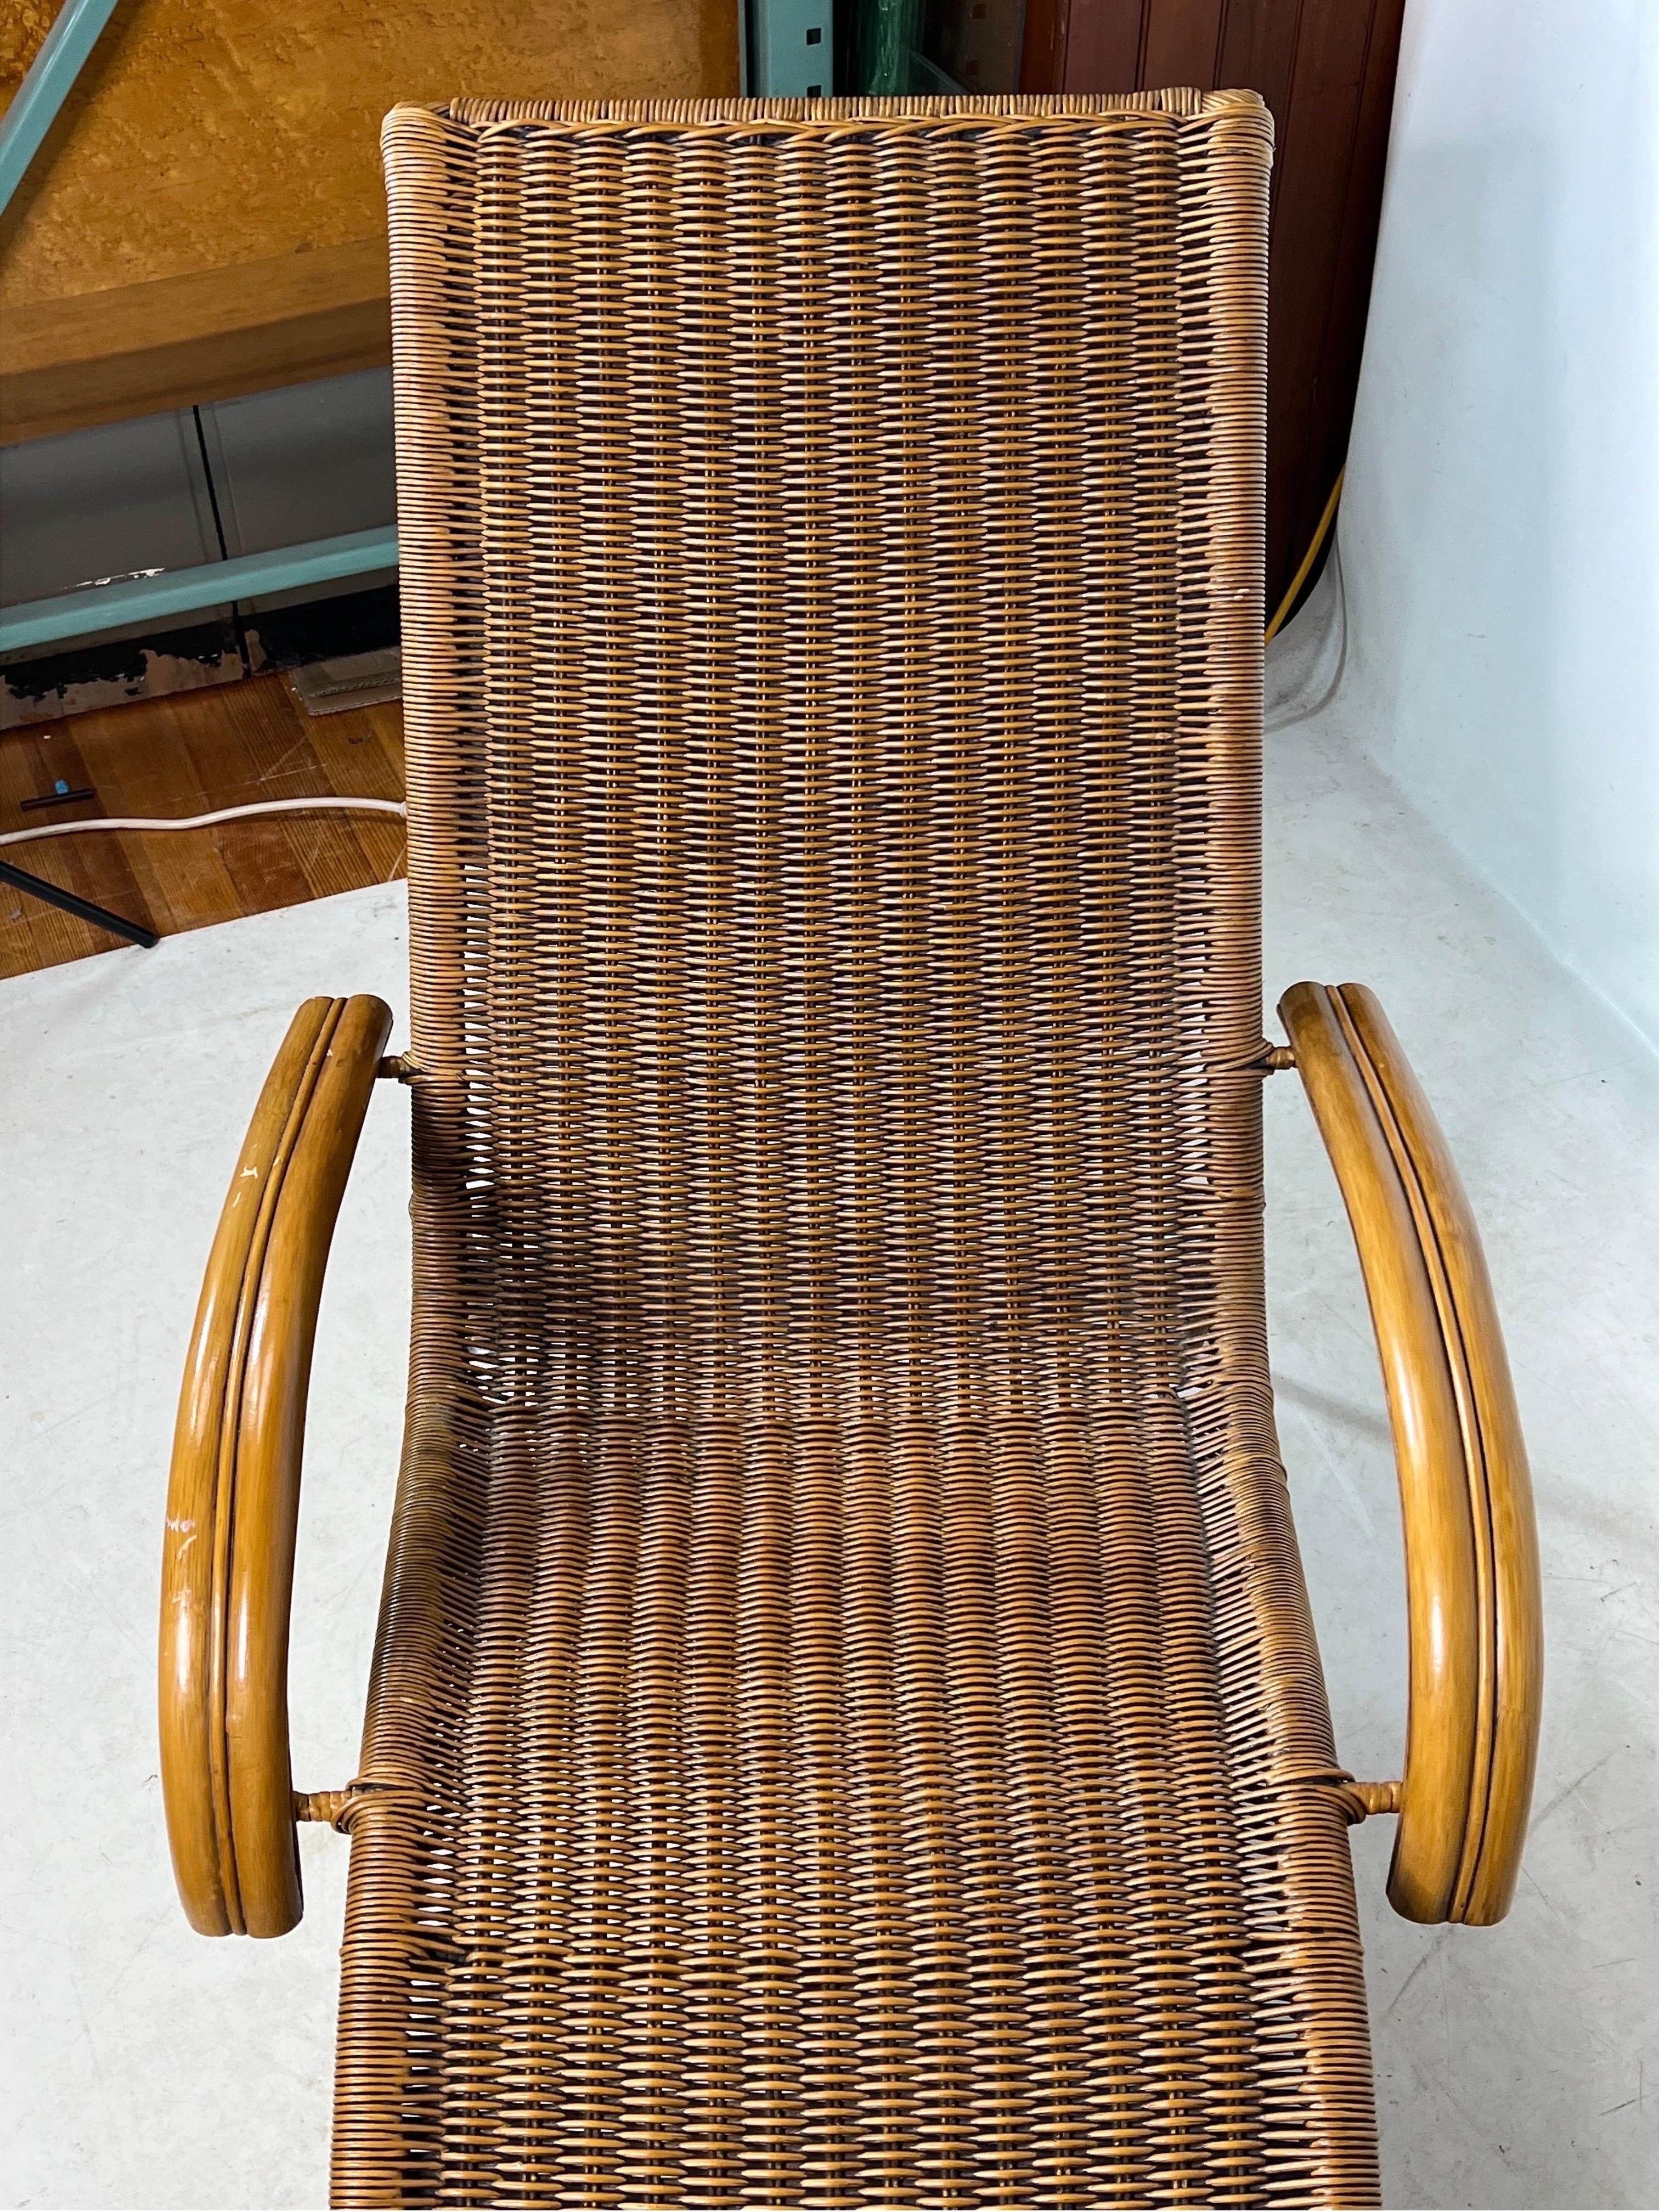 Vintage Pier 1 Imports Wicker and Rattan Lounge Chair 2